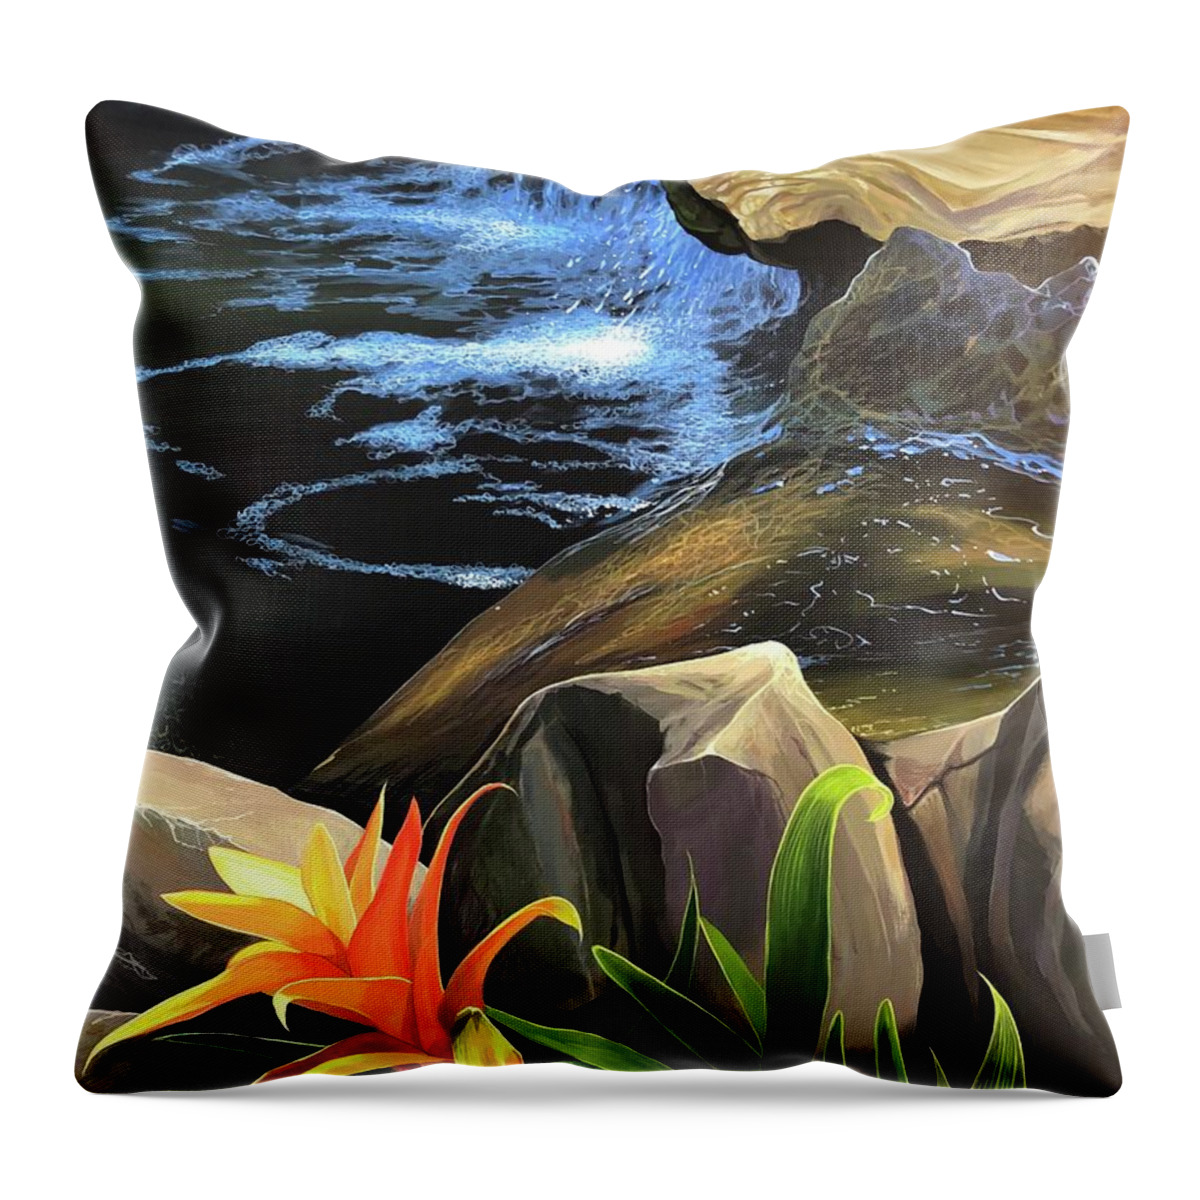 Waterfall Throw Pillow featuring the painting Haunted by Waters by Hunter Jay